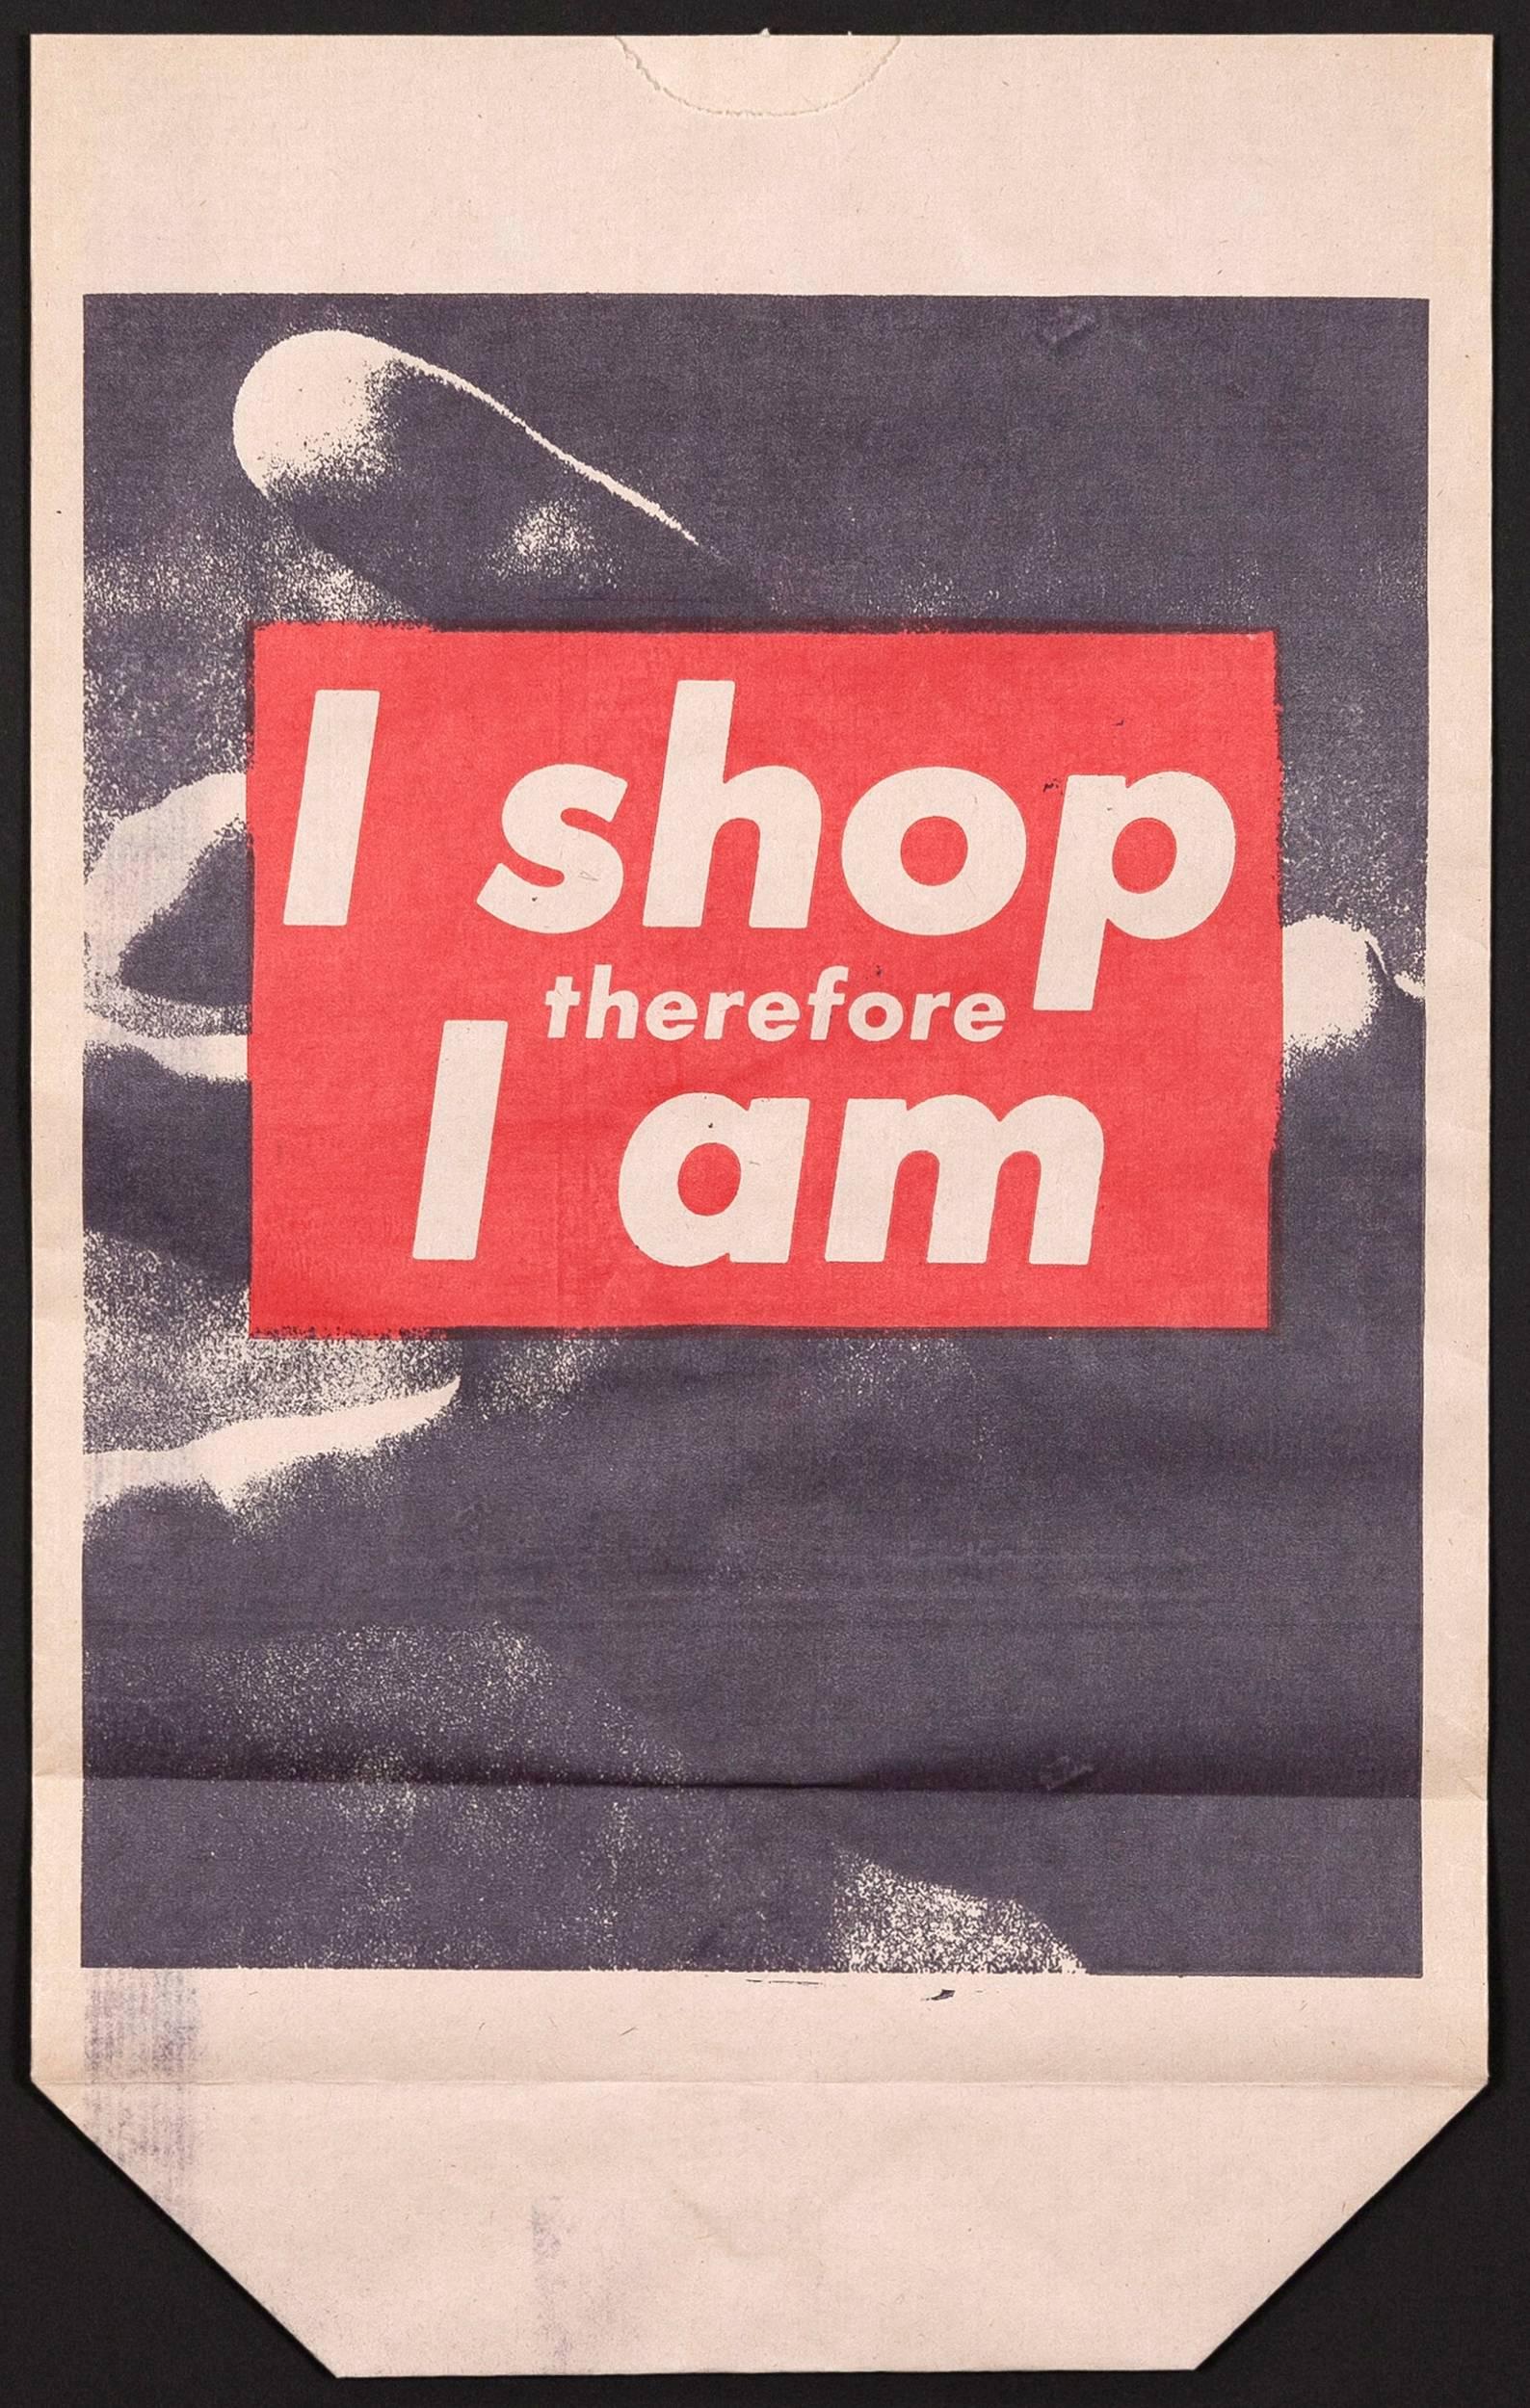 Barbara Kruger is one of the world's most provocative, distinctive and original artists.

In 2005, she was awarded the 